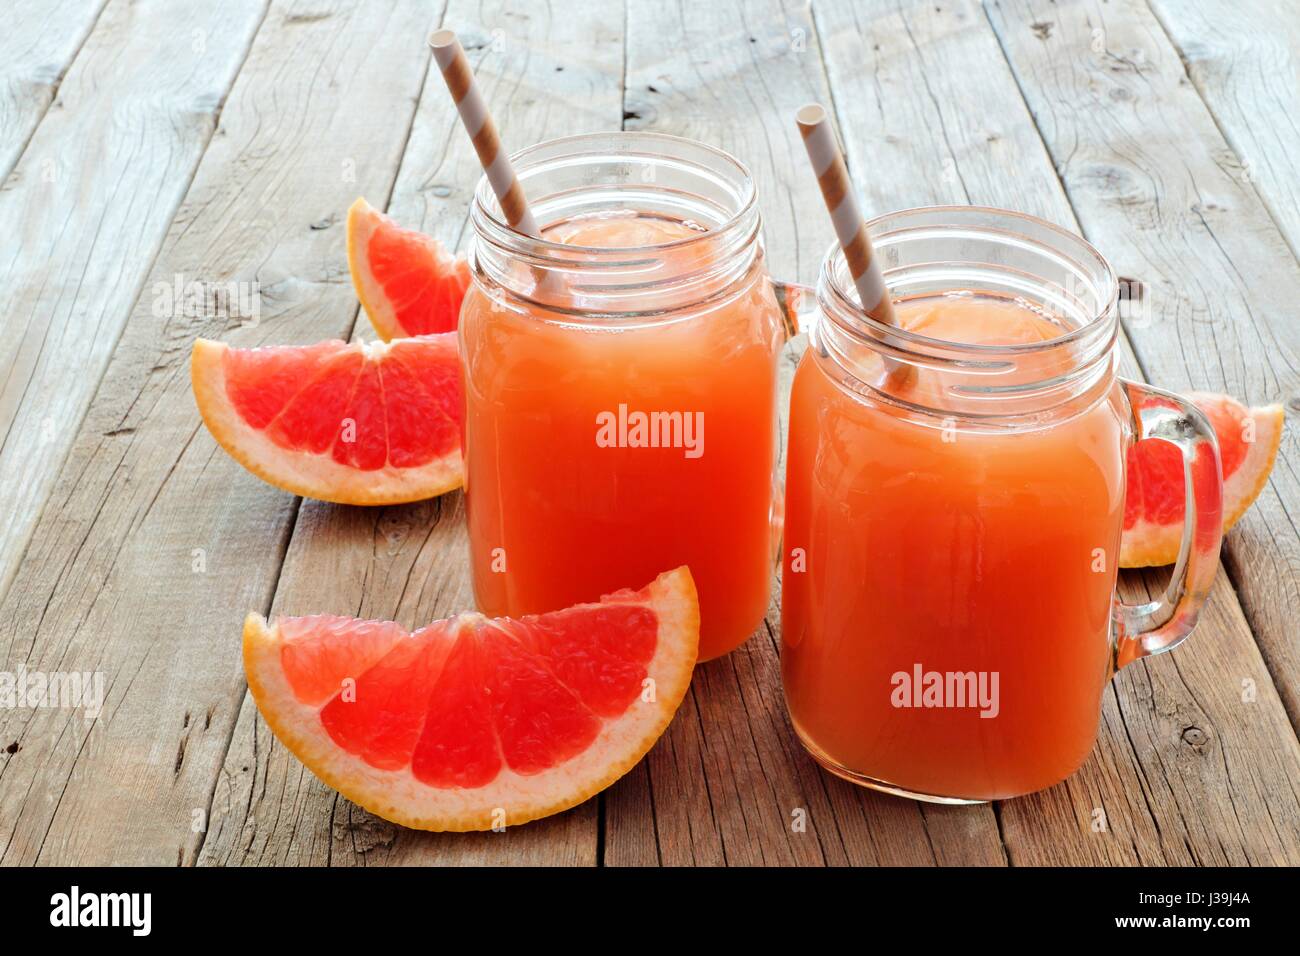 Two mason jar glasses of grapefruit juice with slices and straws on rustic wooden background Stock Photo